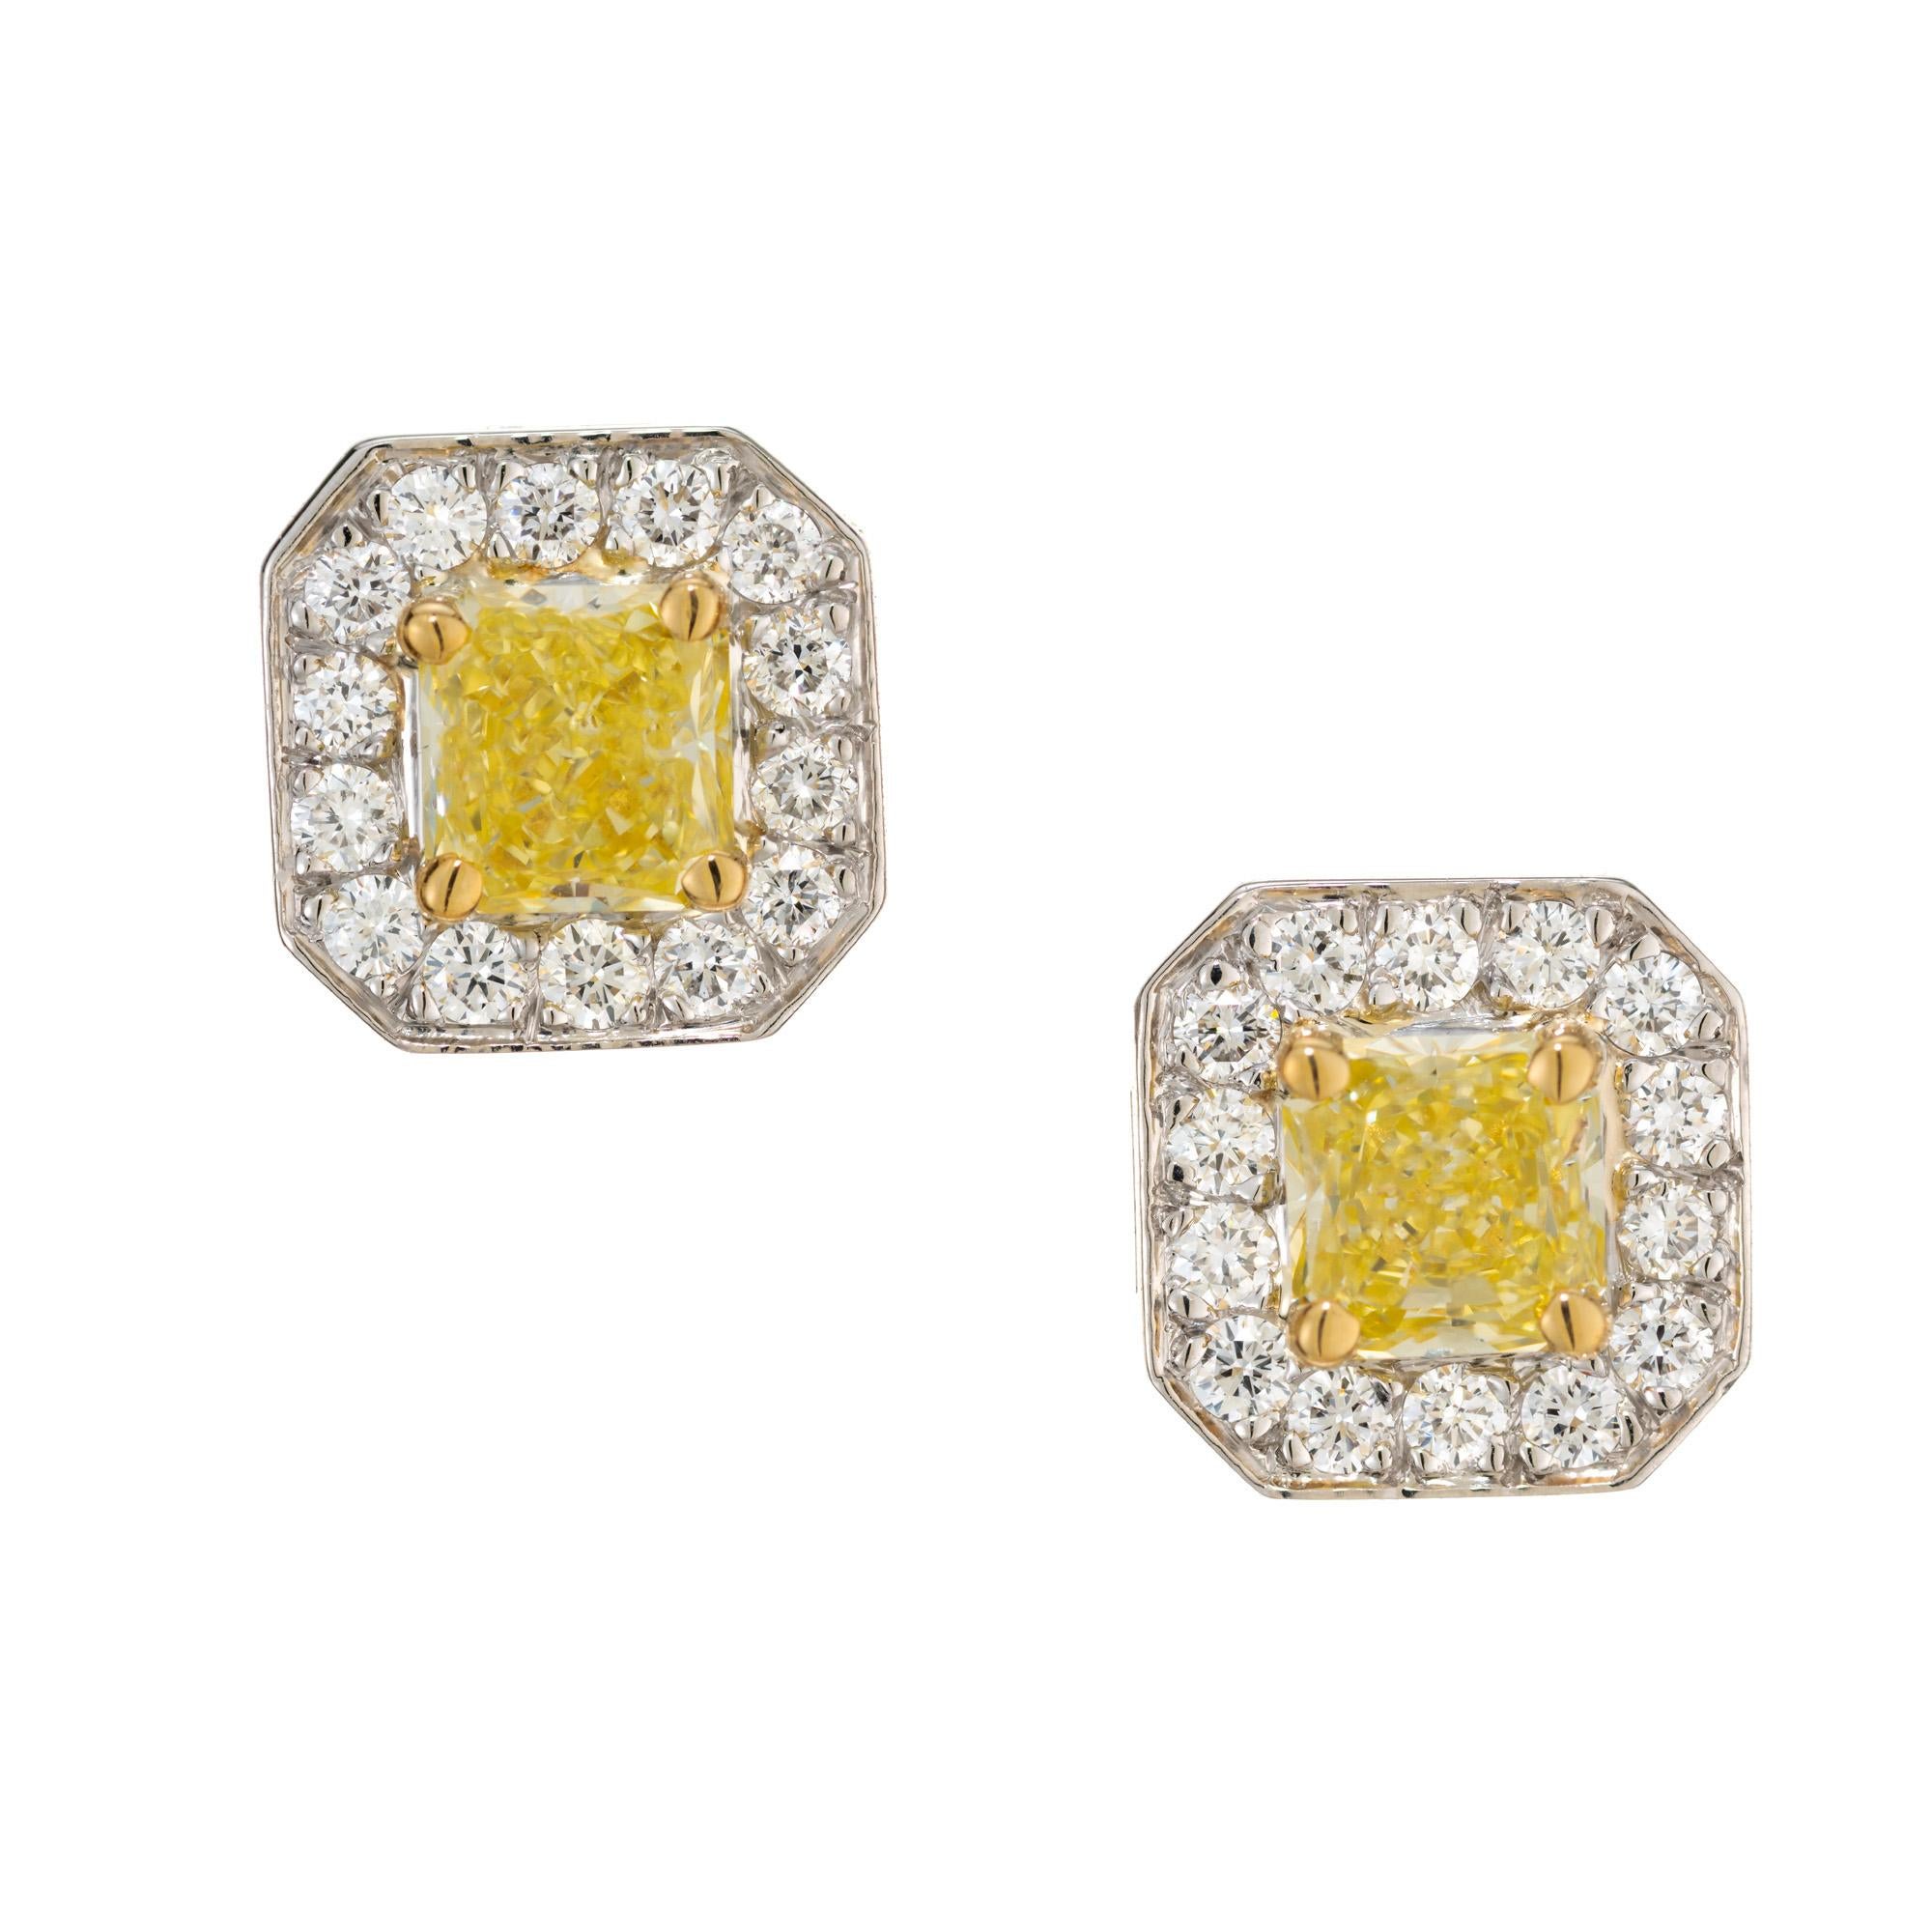 Yellow and white diamond earrings. 2 square cut bright natural fancy yellow diamonds, set in 14k white gold octagonal settings with 18k yellow gold prongs. Each yellow diamond is framed by a halo of 14 round bright white diamonds. These exceptional